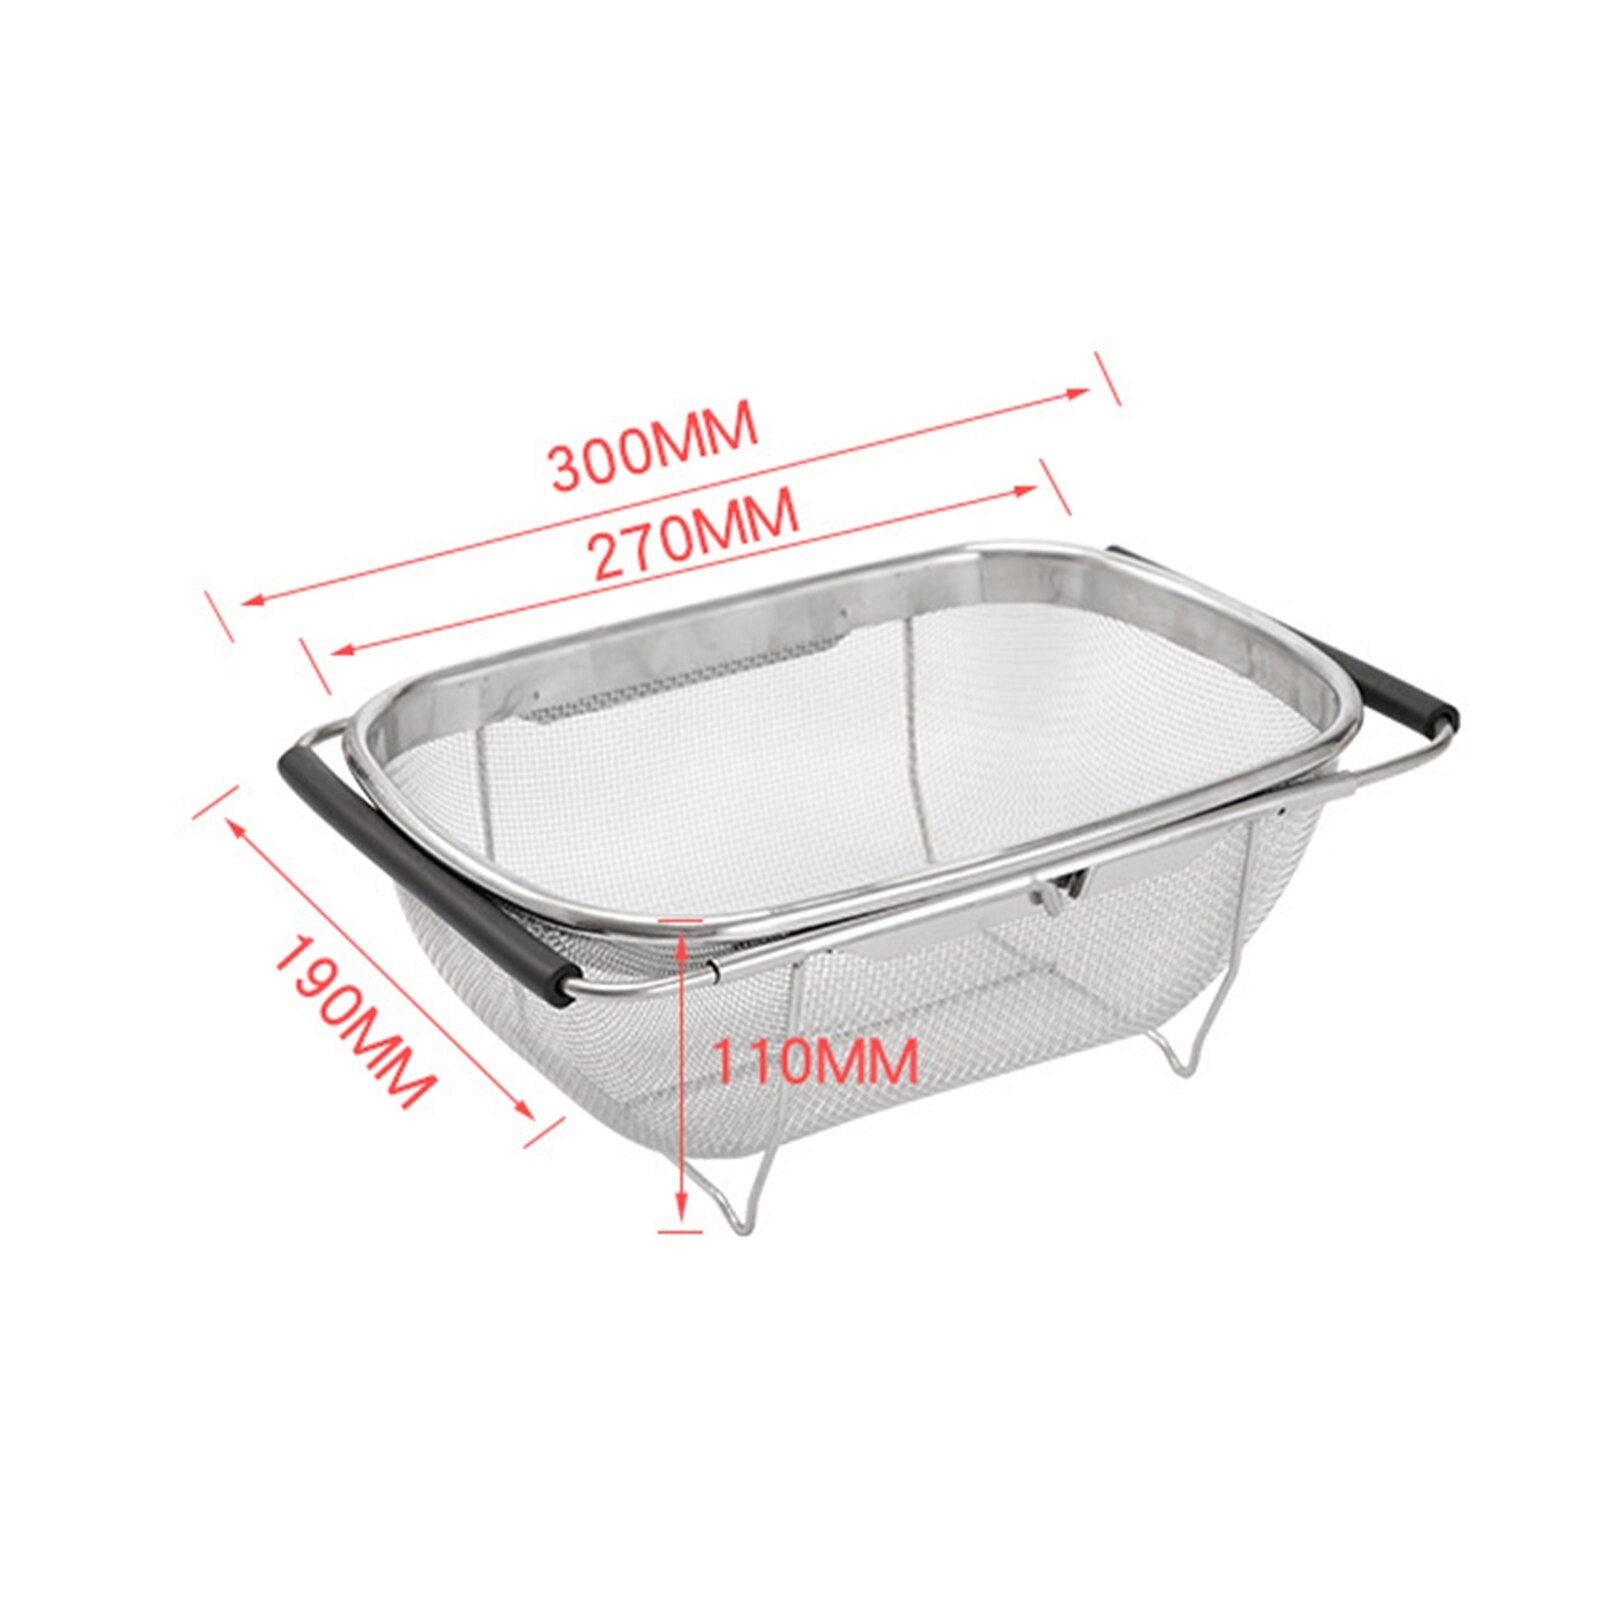 Over The Sink Telescopic Dish Rack - UTILITY5STORE